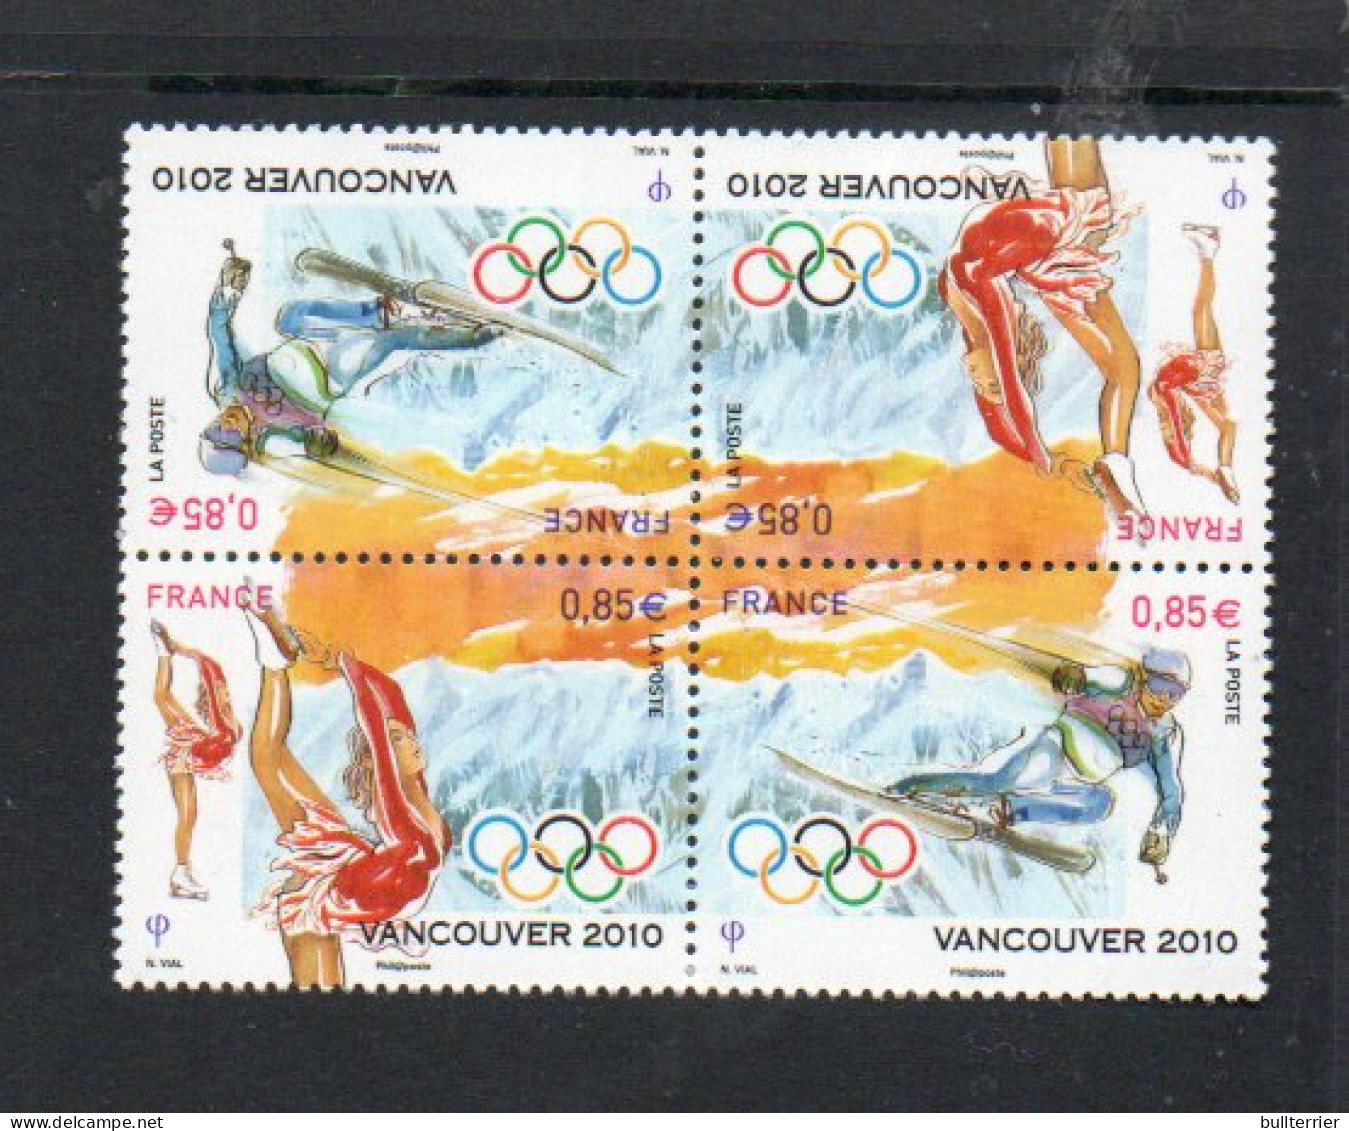 OLYMPICS - FRANCE -2010- VANCOUVER OLYMPCIS SET OF 2 IN SE TENANT BLOCK OF 4  MINT NEVER HINGED  SG CAT £16 - Invierno 2010: Vancouver